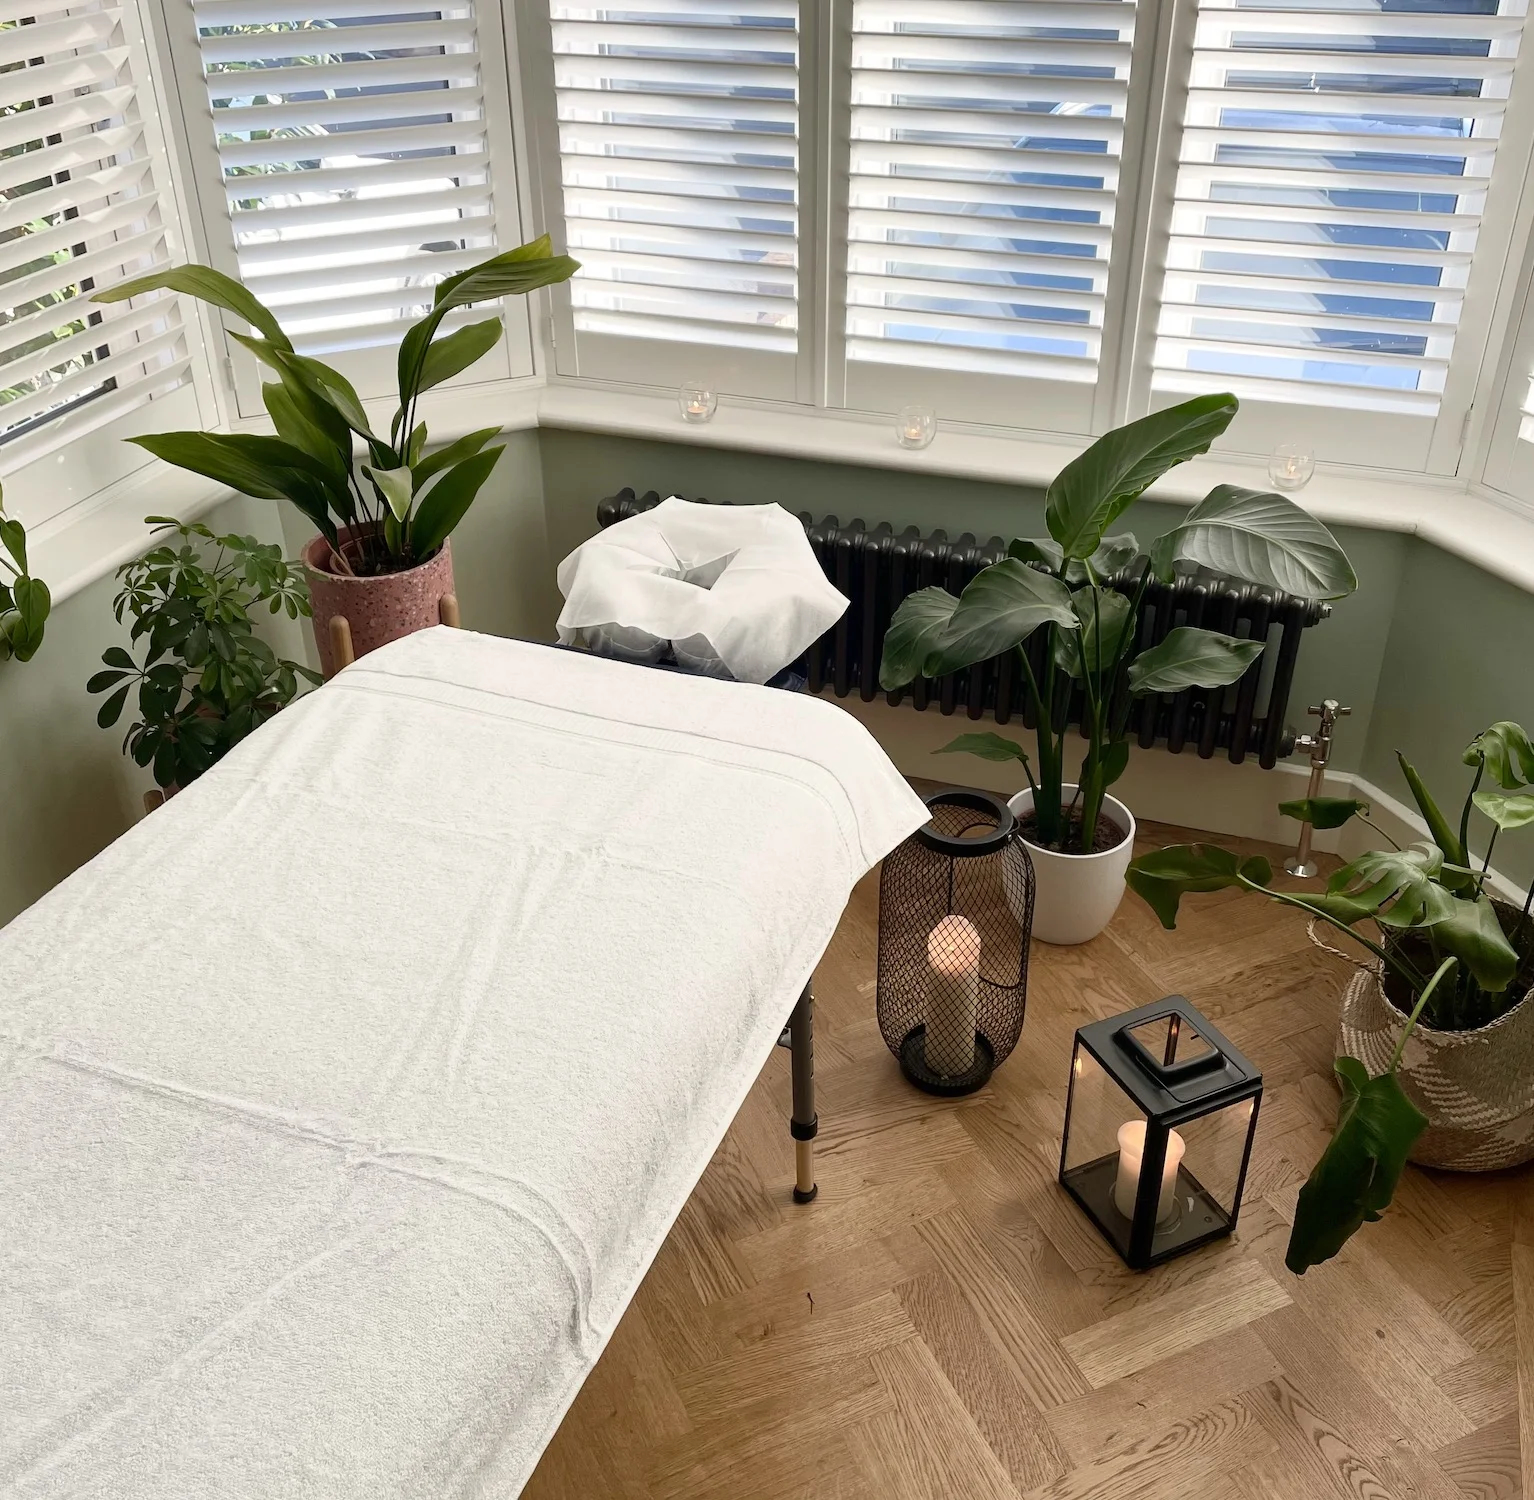 Home massage setting in apartment window